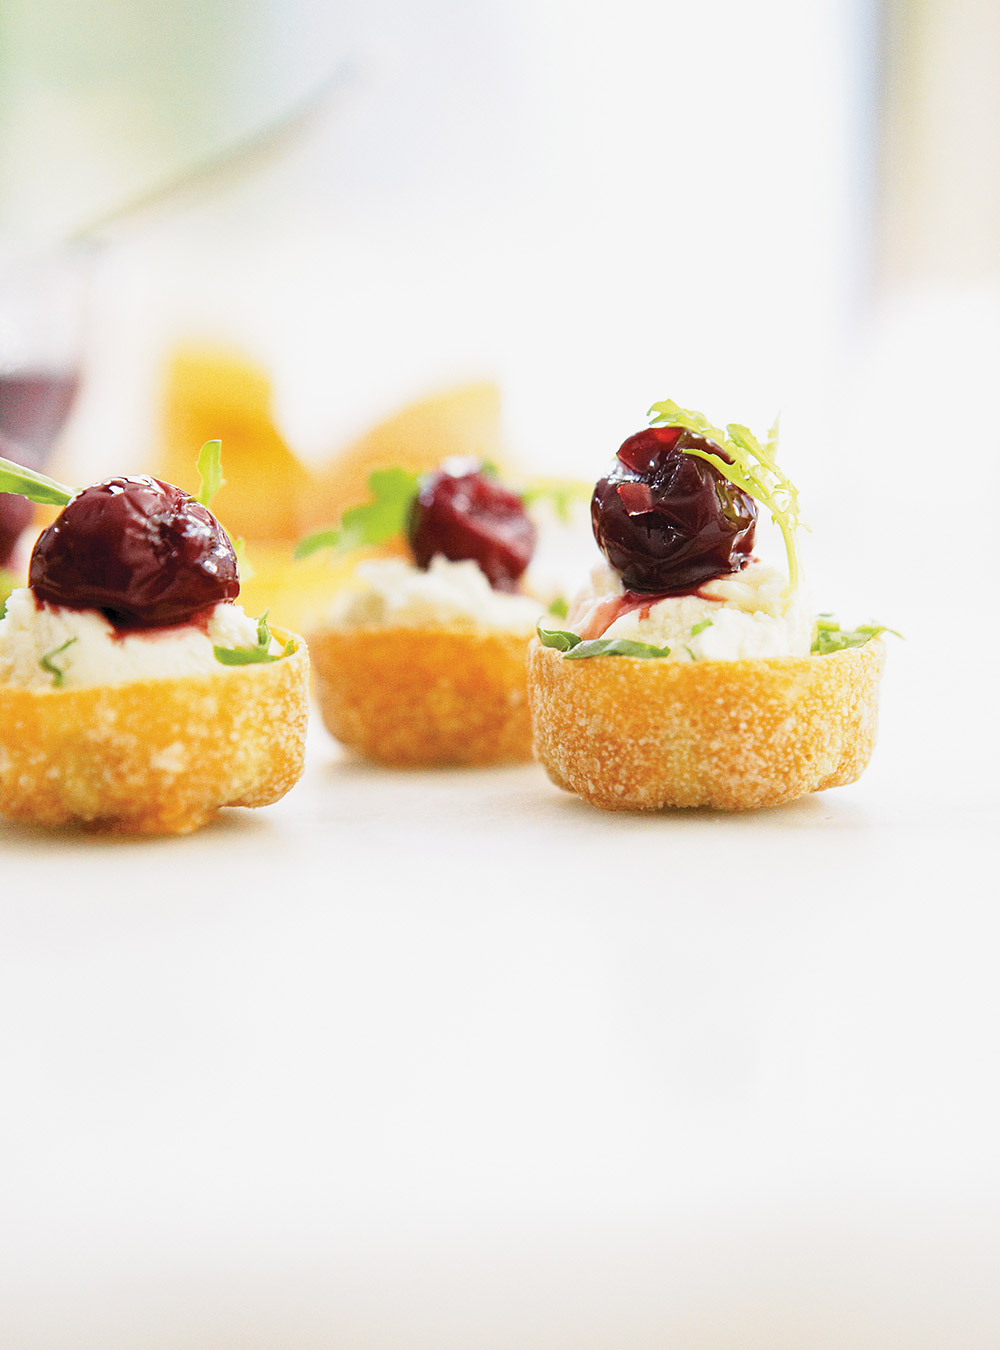 Goat Cheese and Sour Cherry Bites